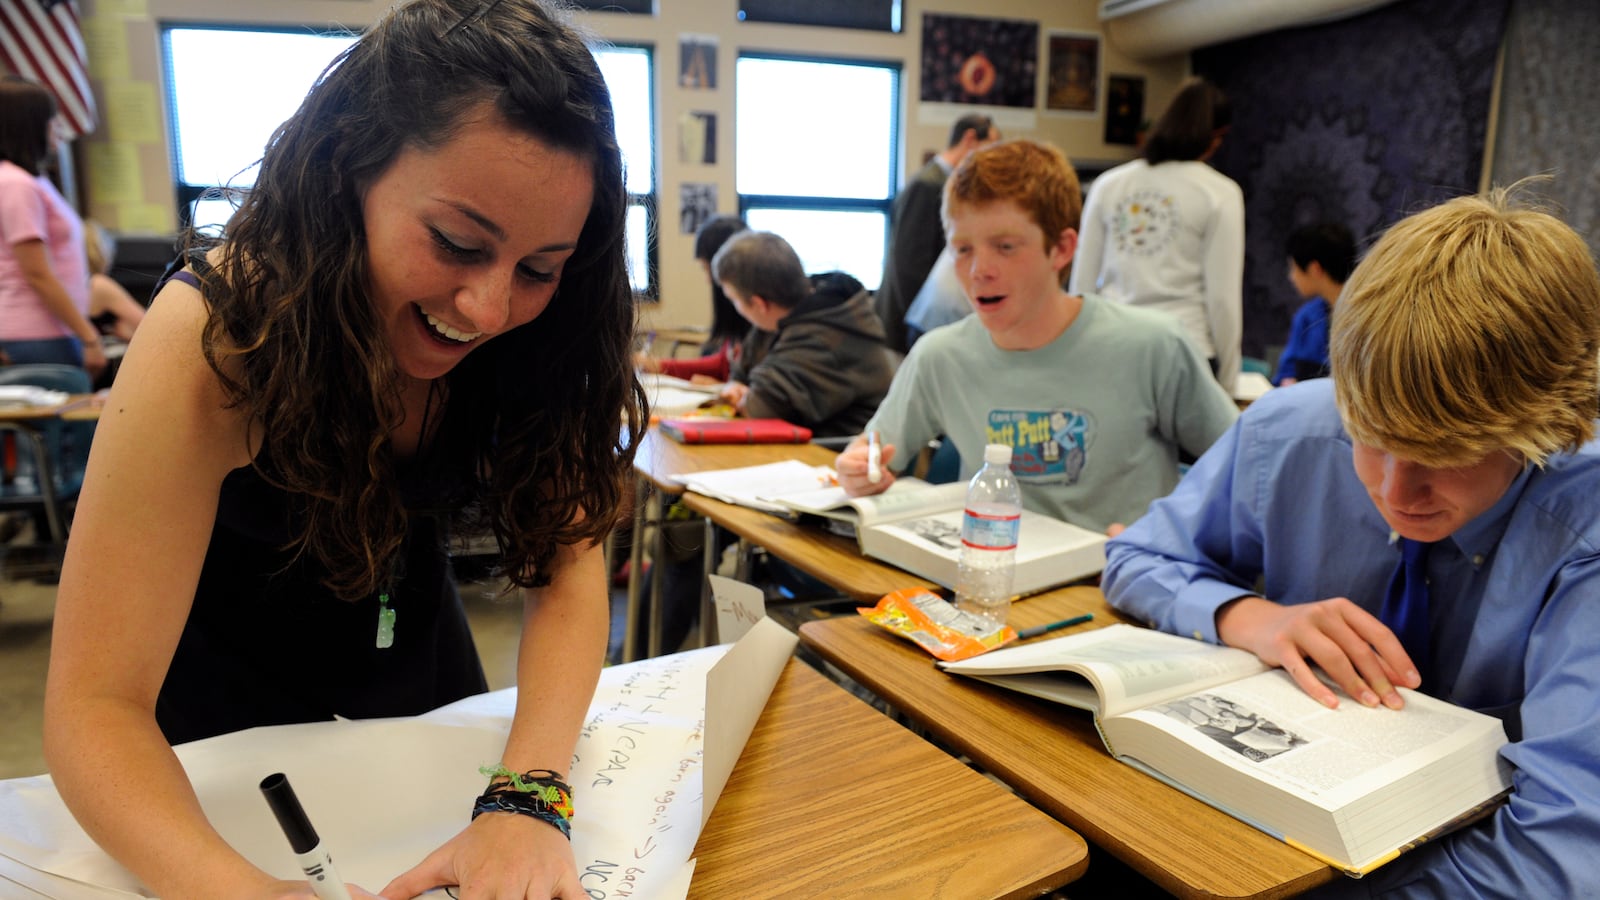 Juniors in an AP U.S. History class in Lafayette, Colorado. (Photo By Kathryn Scott Osler/The Denver Post via Getty Images)